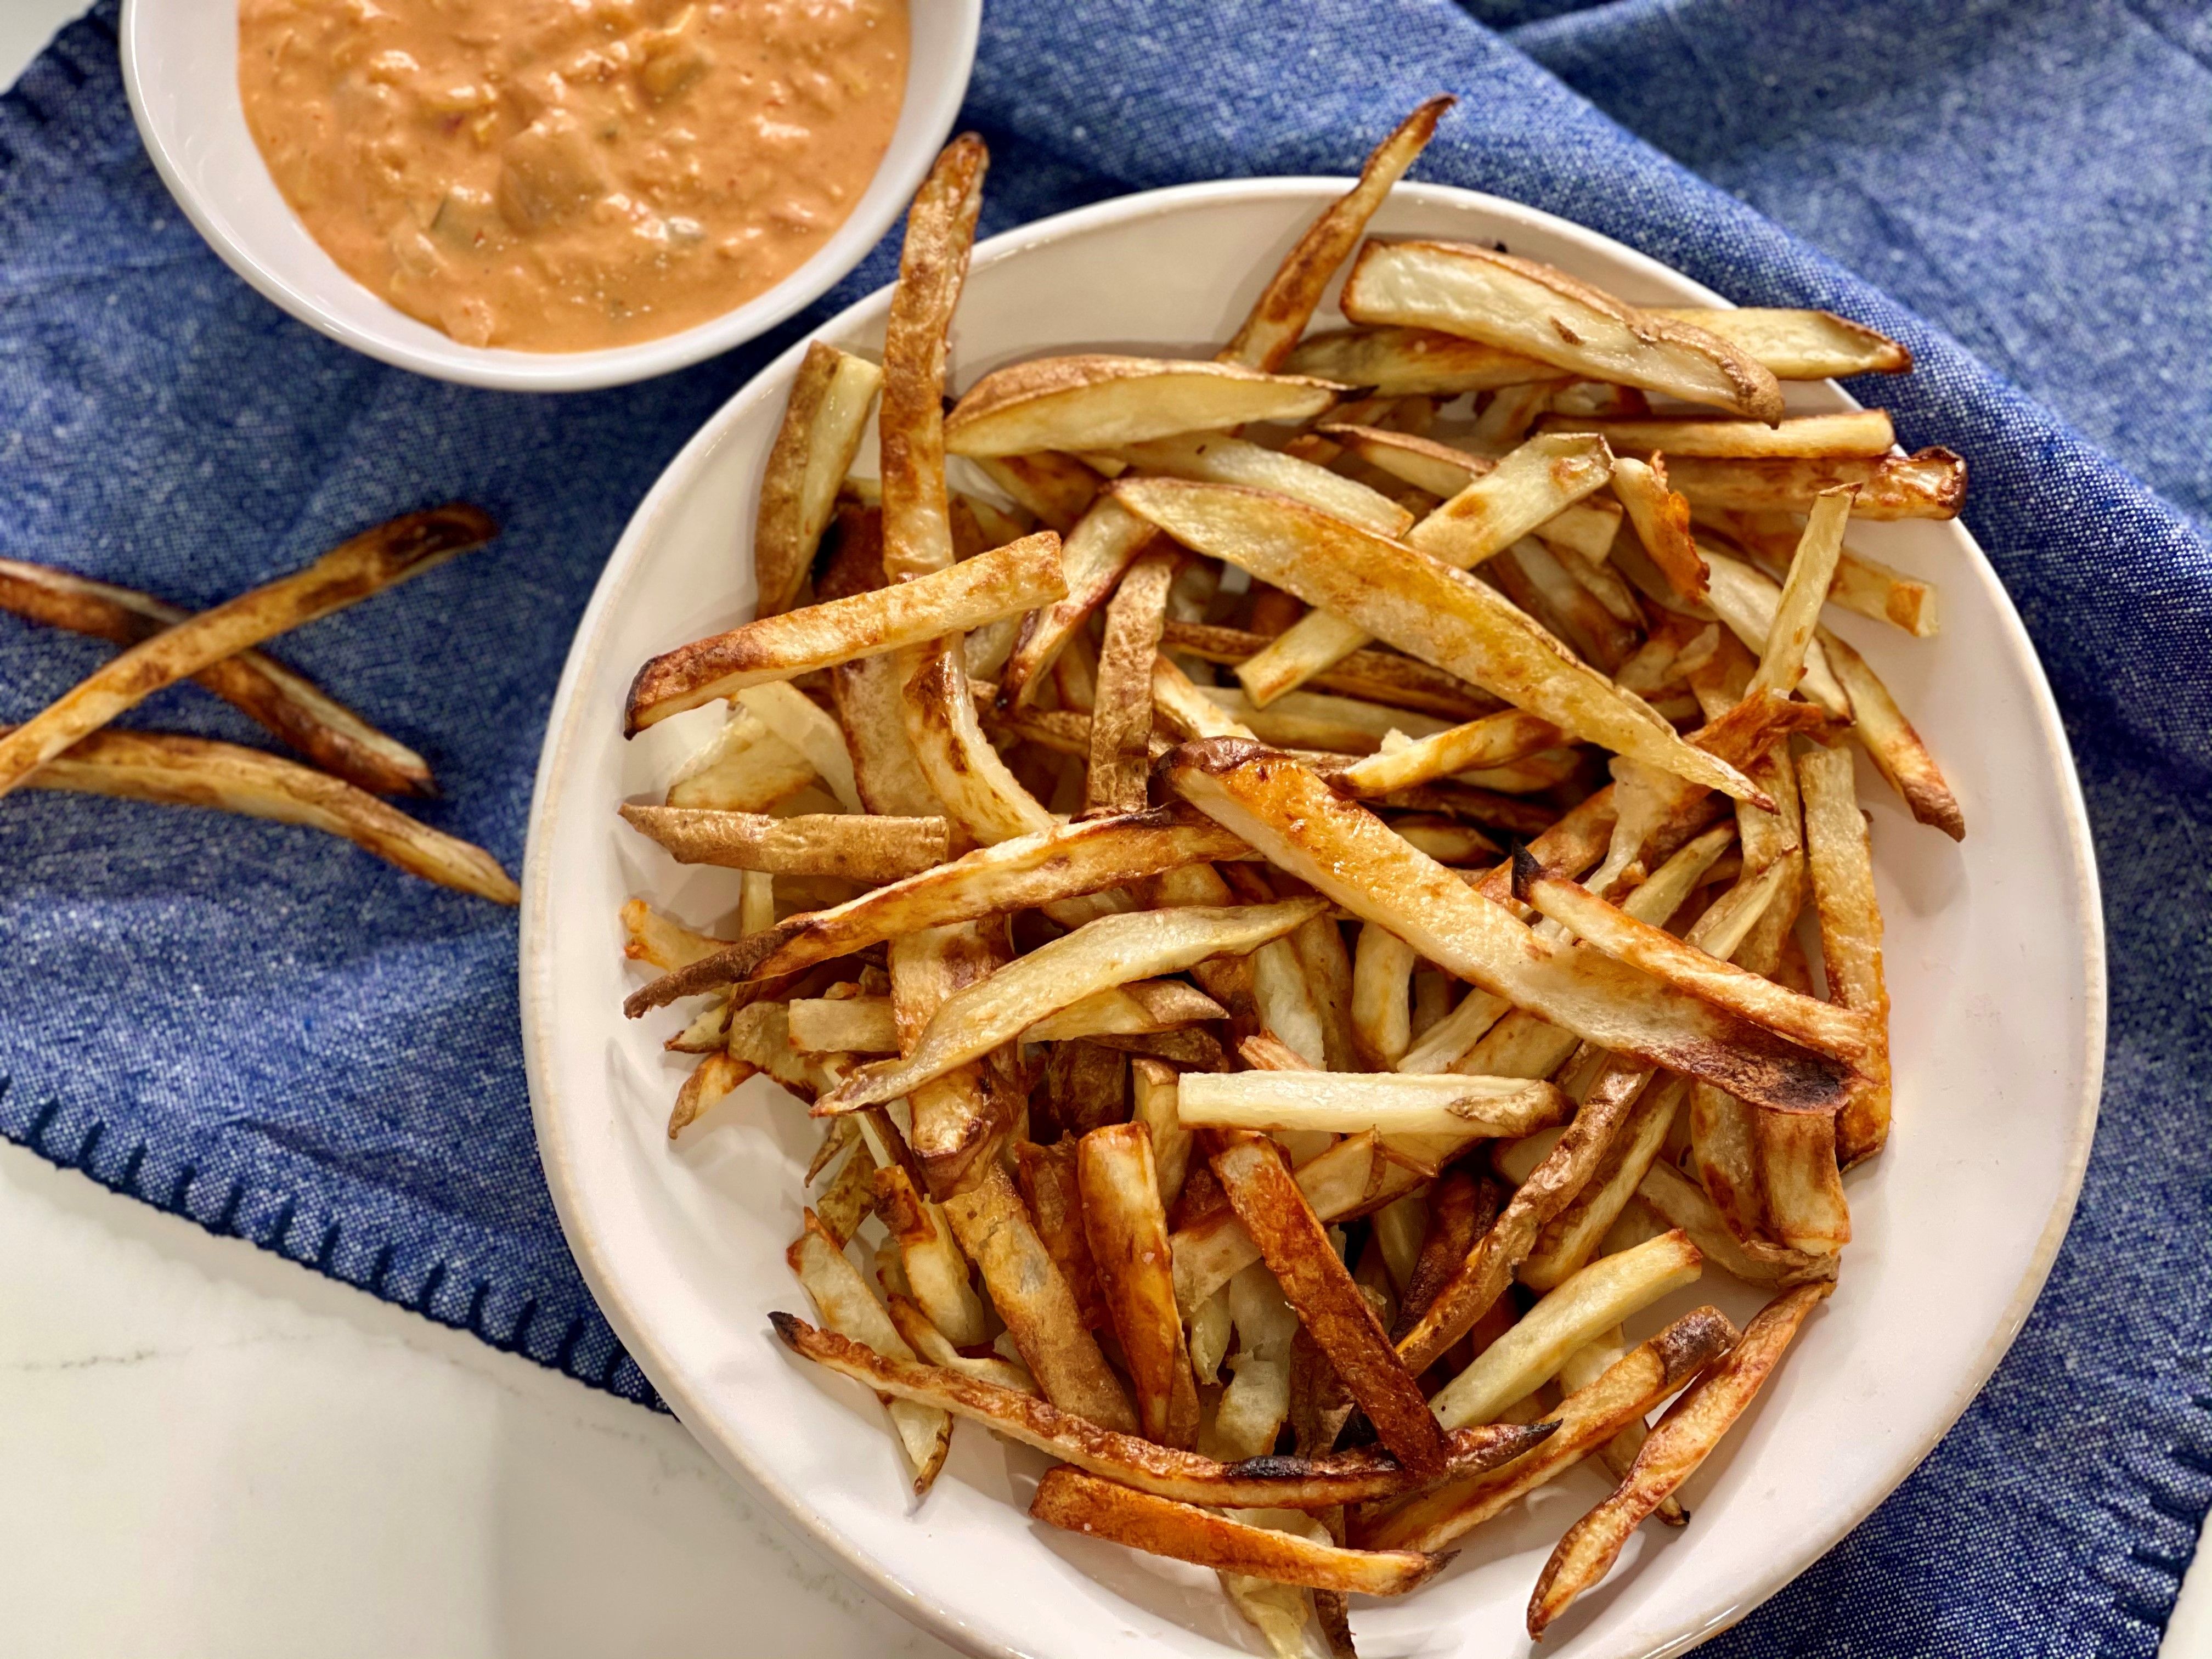 Oven baked french fries